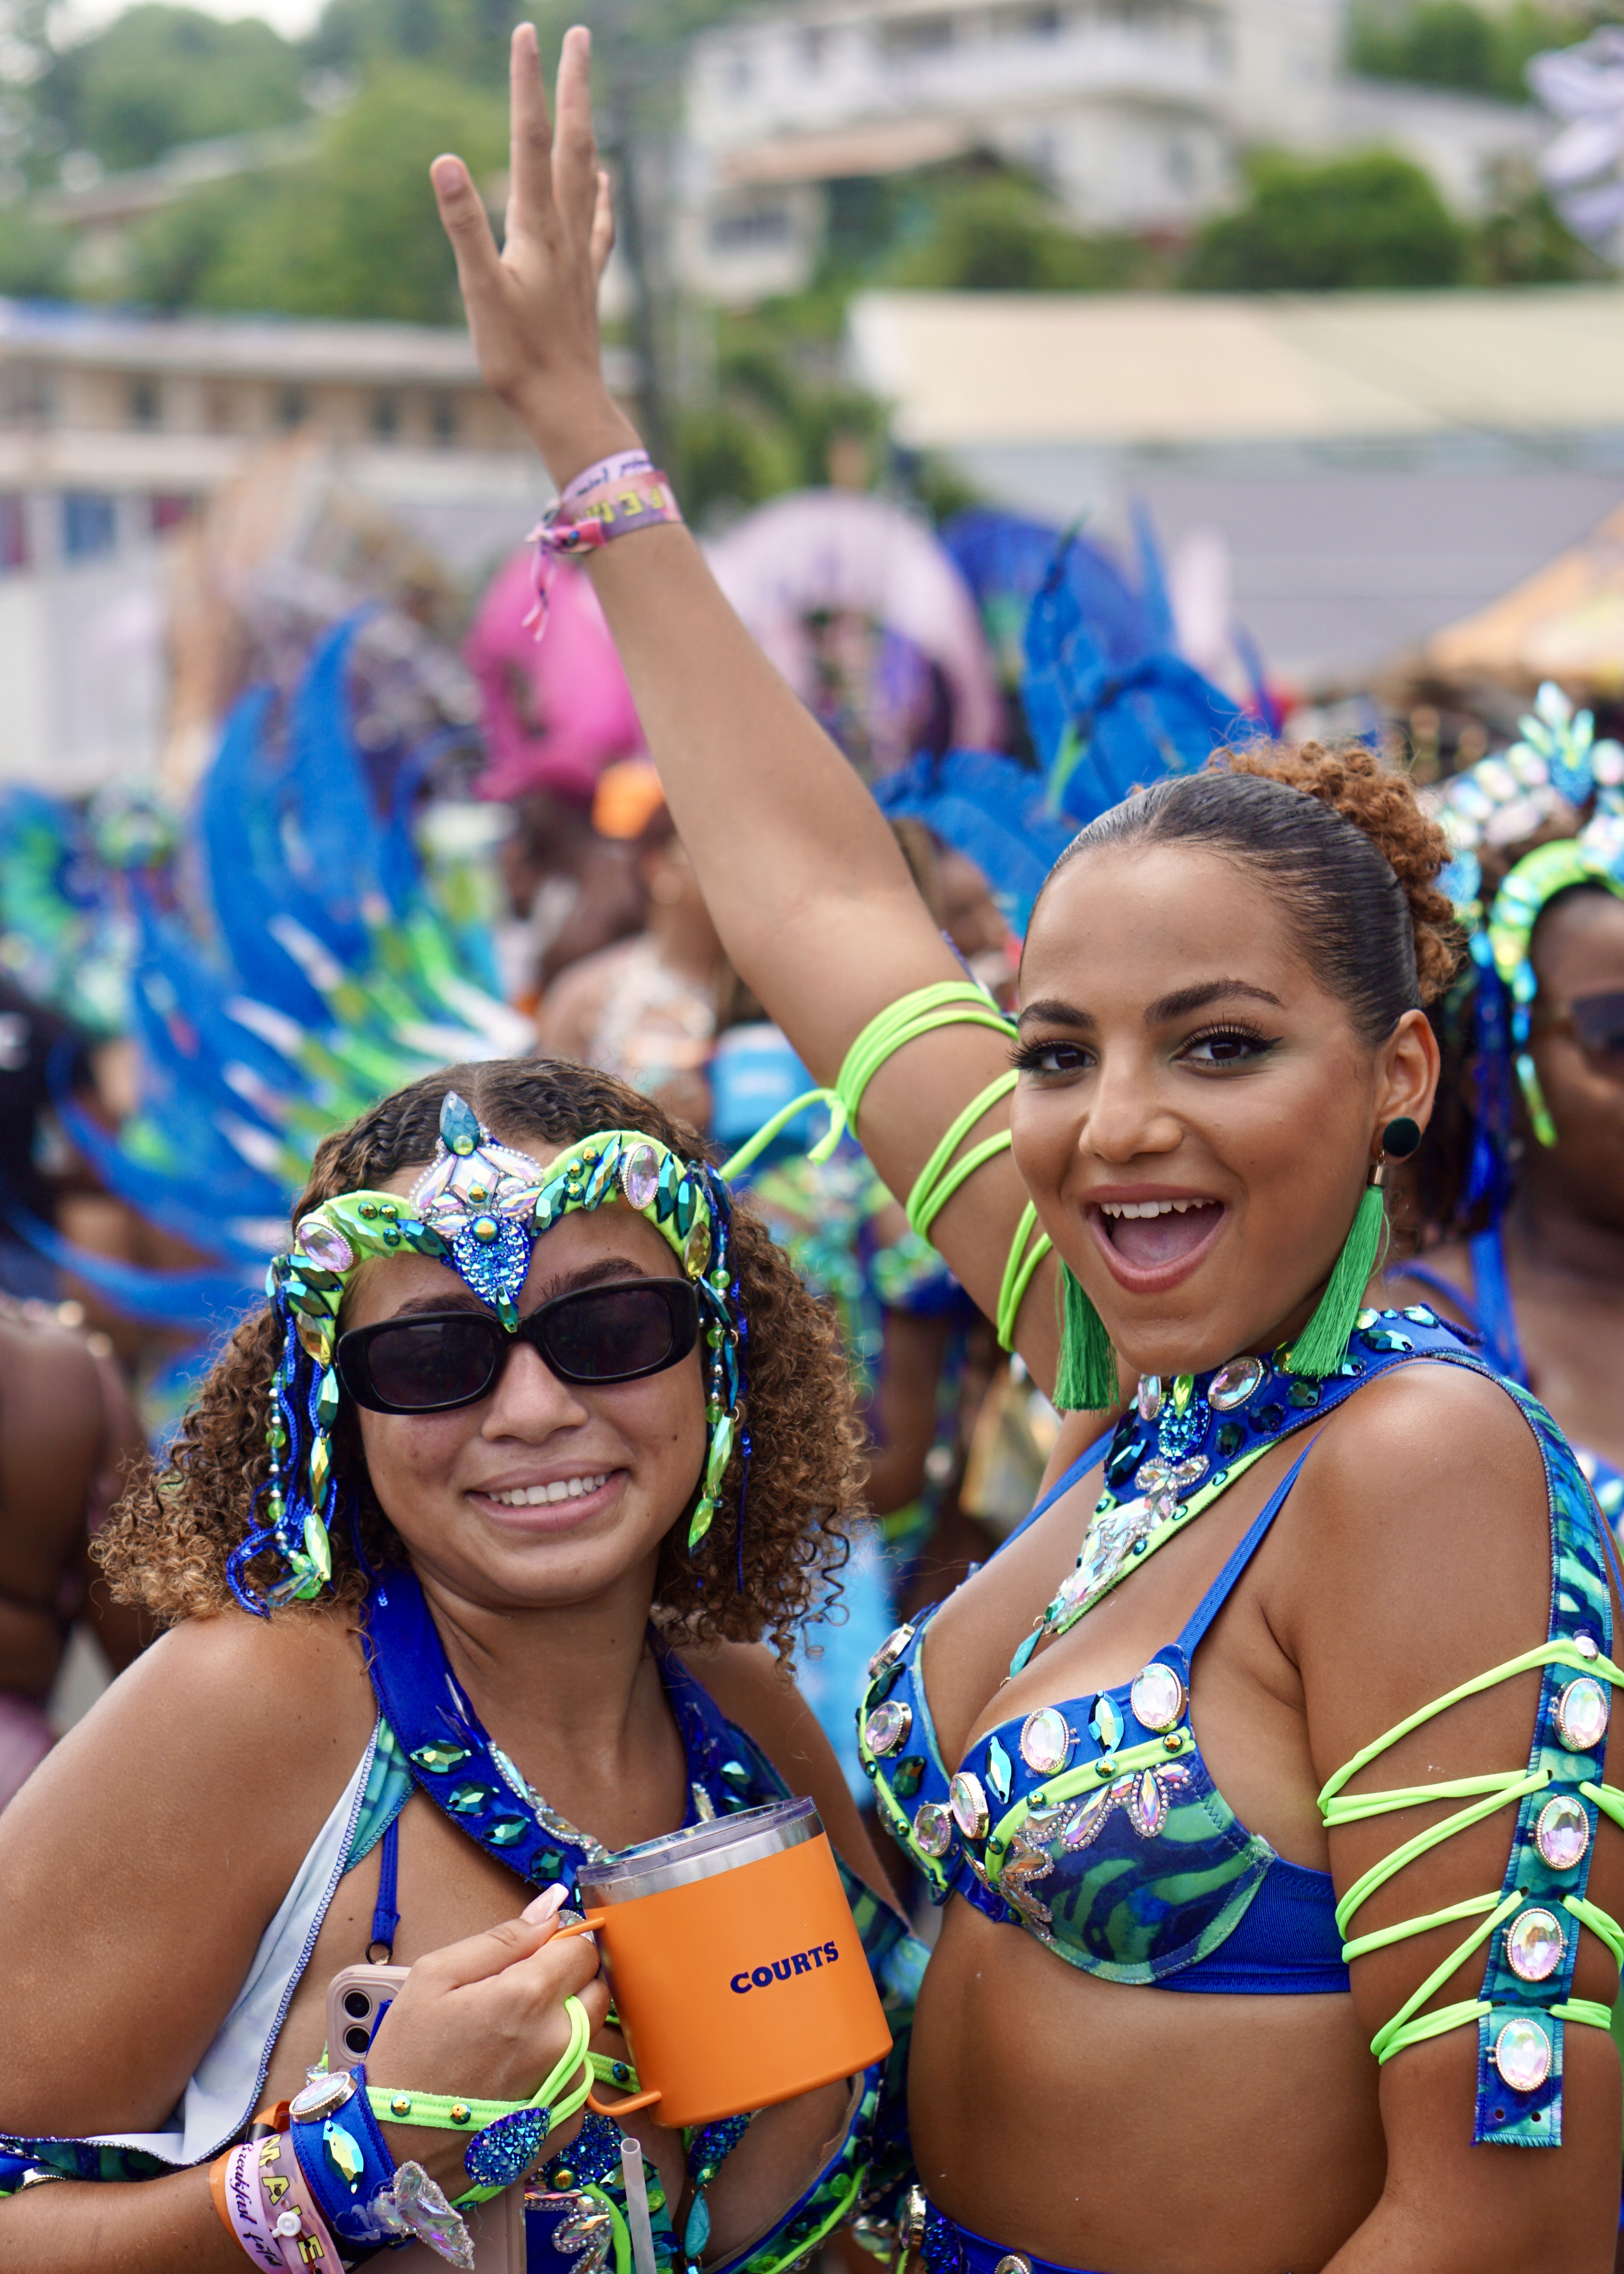 Twp beautiful women in their st lucia carnival costume smiling